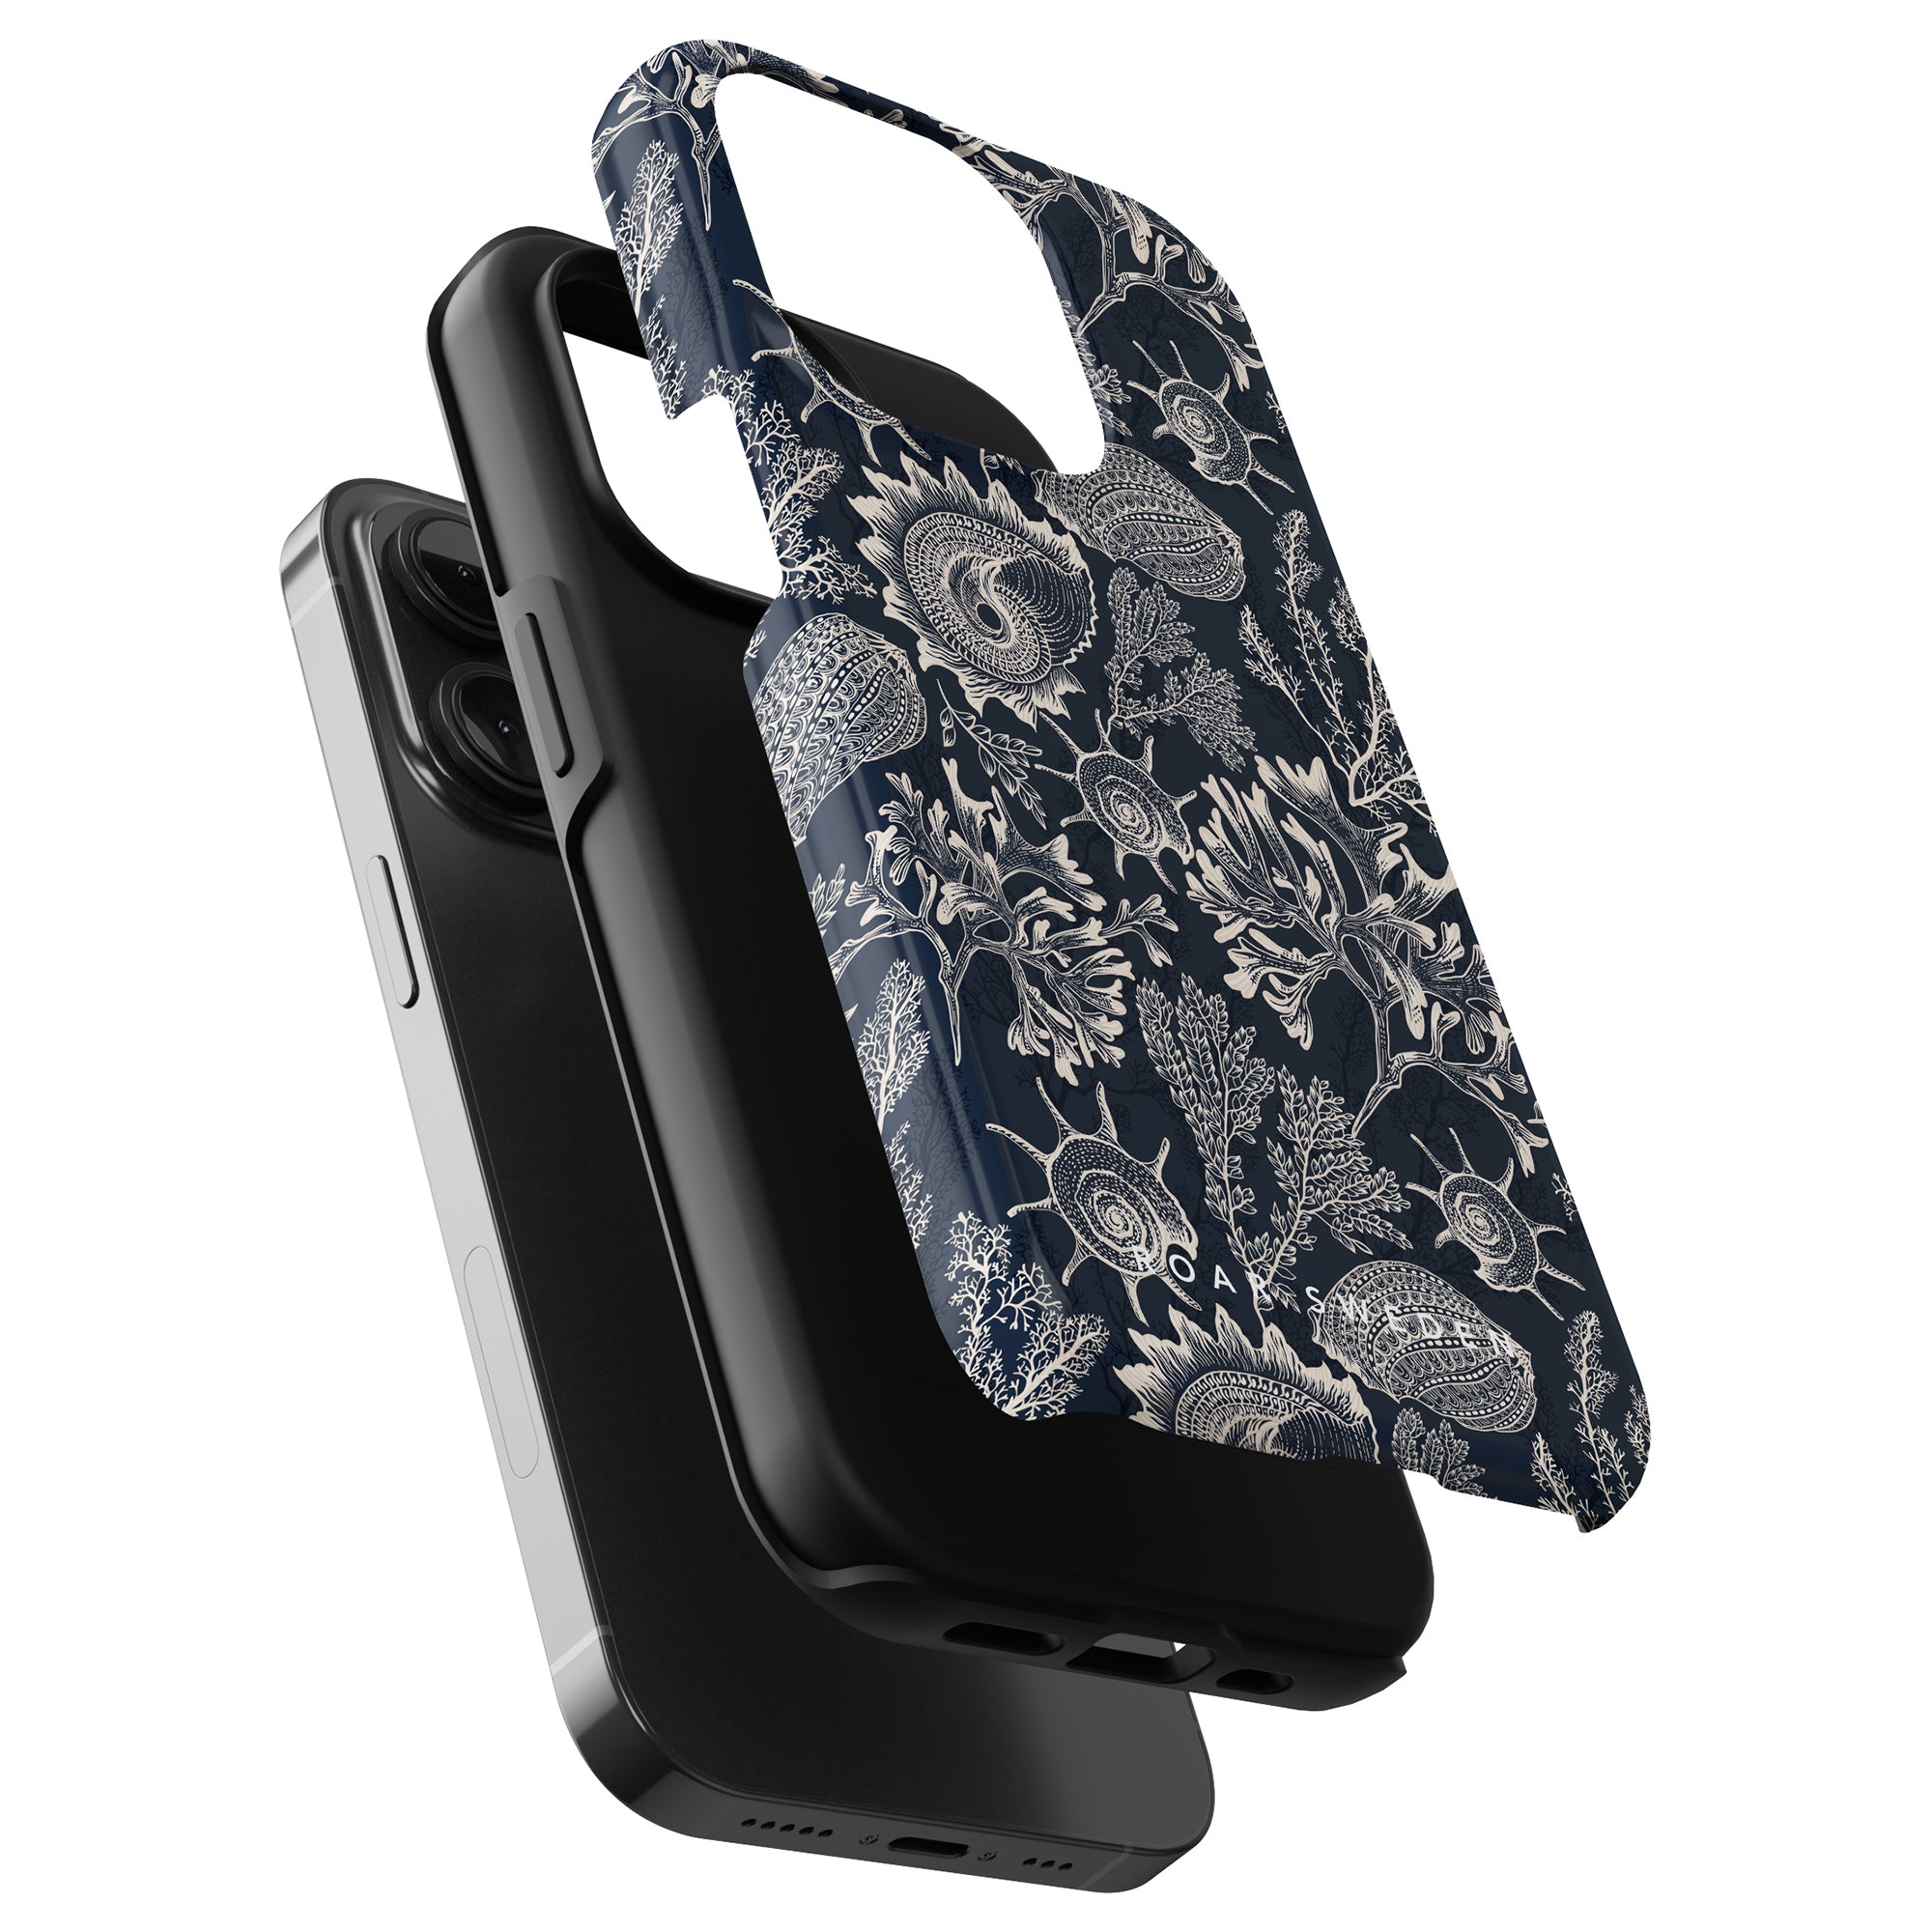 A smartphone with a Blue Corals - Tough Case linked to a floral-patterned strap from the ocean kollektion, displayed against a white background.